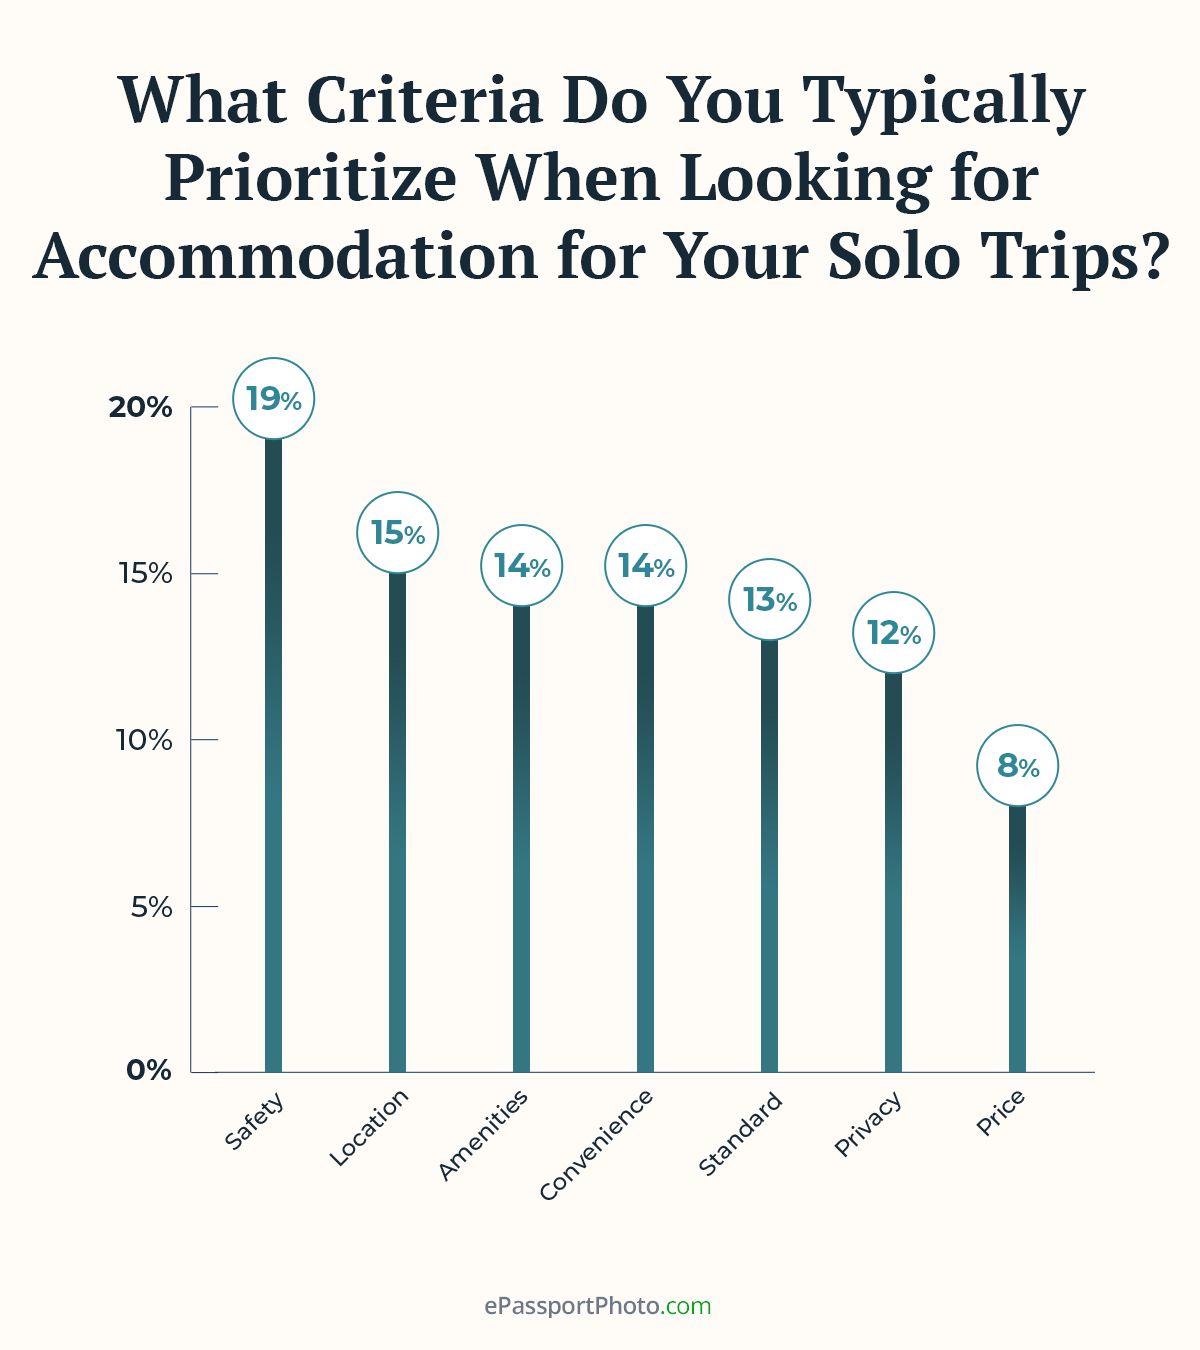 most solo travelers (19%) consider safety the most important criterion when searching for accommodation